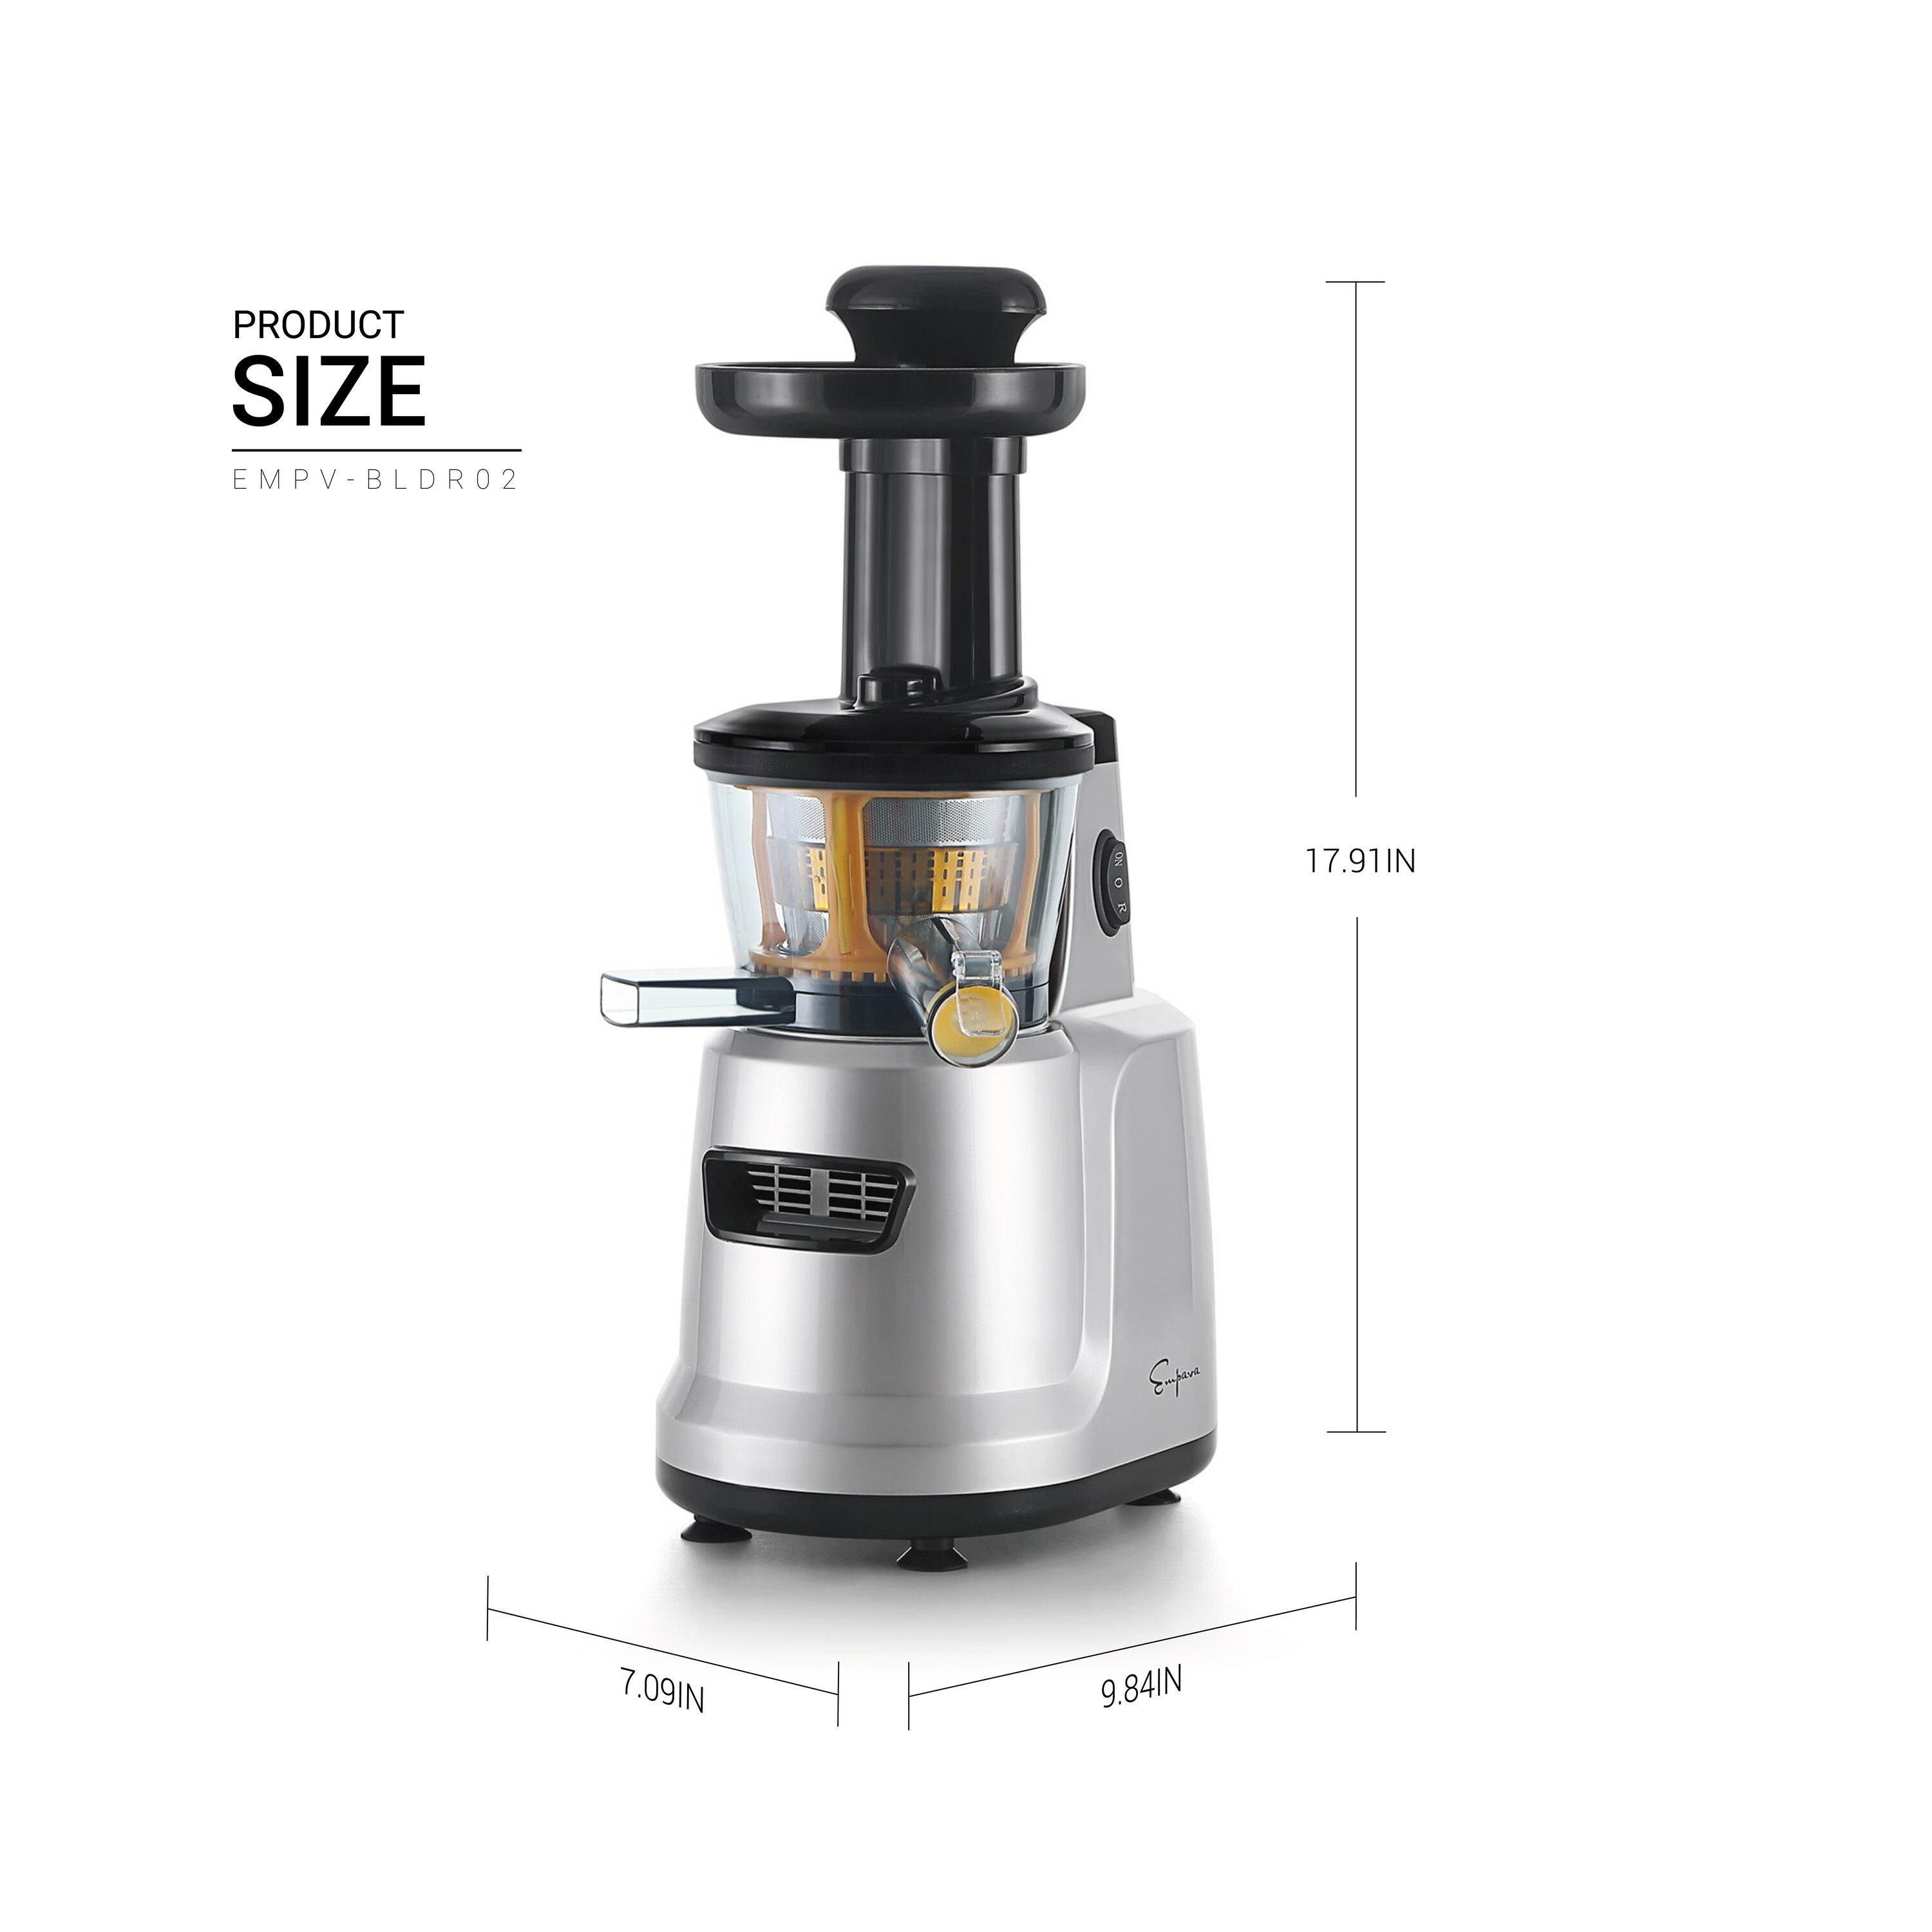 Kitchen in the box Juicer Machines, Small Cold Press Juicer for Single  Serve, Slow Masticating Juicer Machine Vegetable and Fruit, Quiet DC Motor